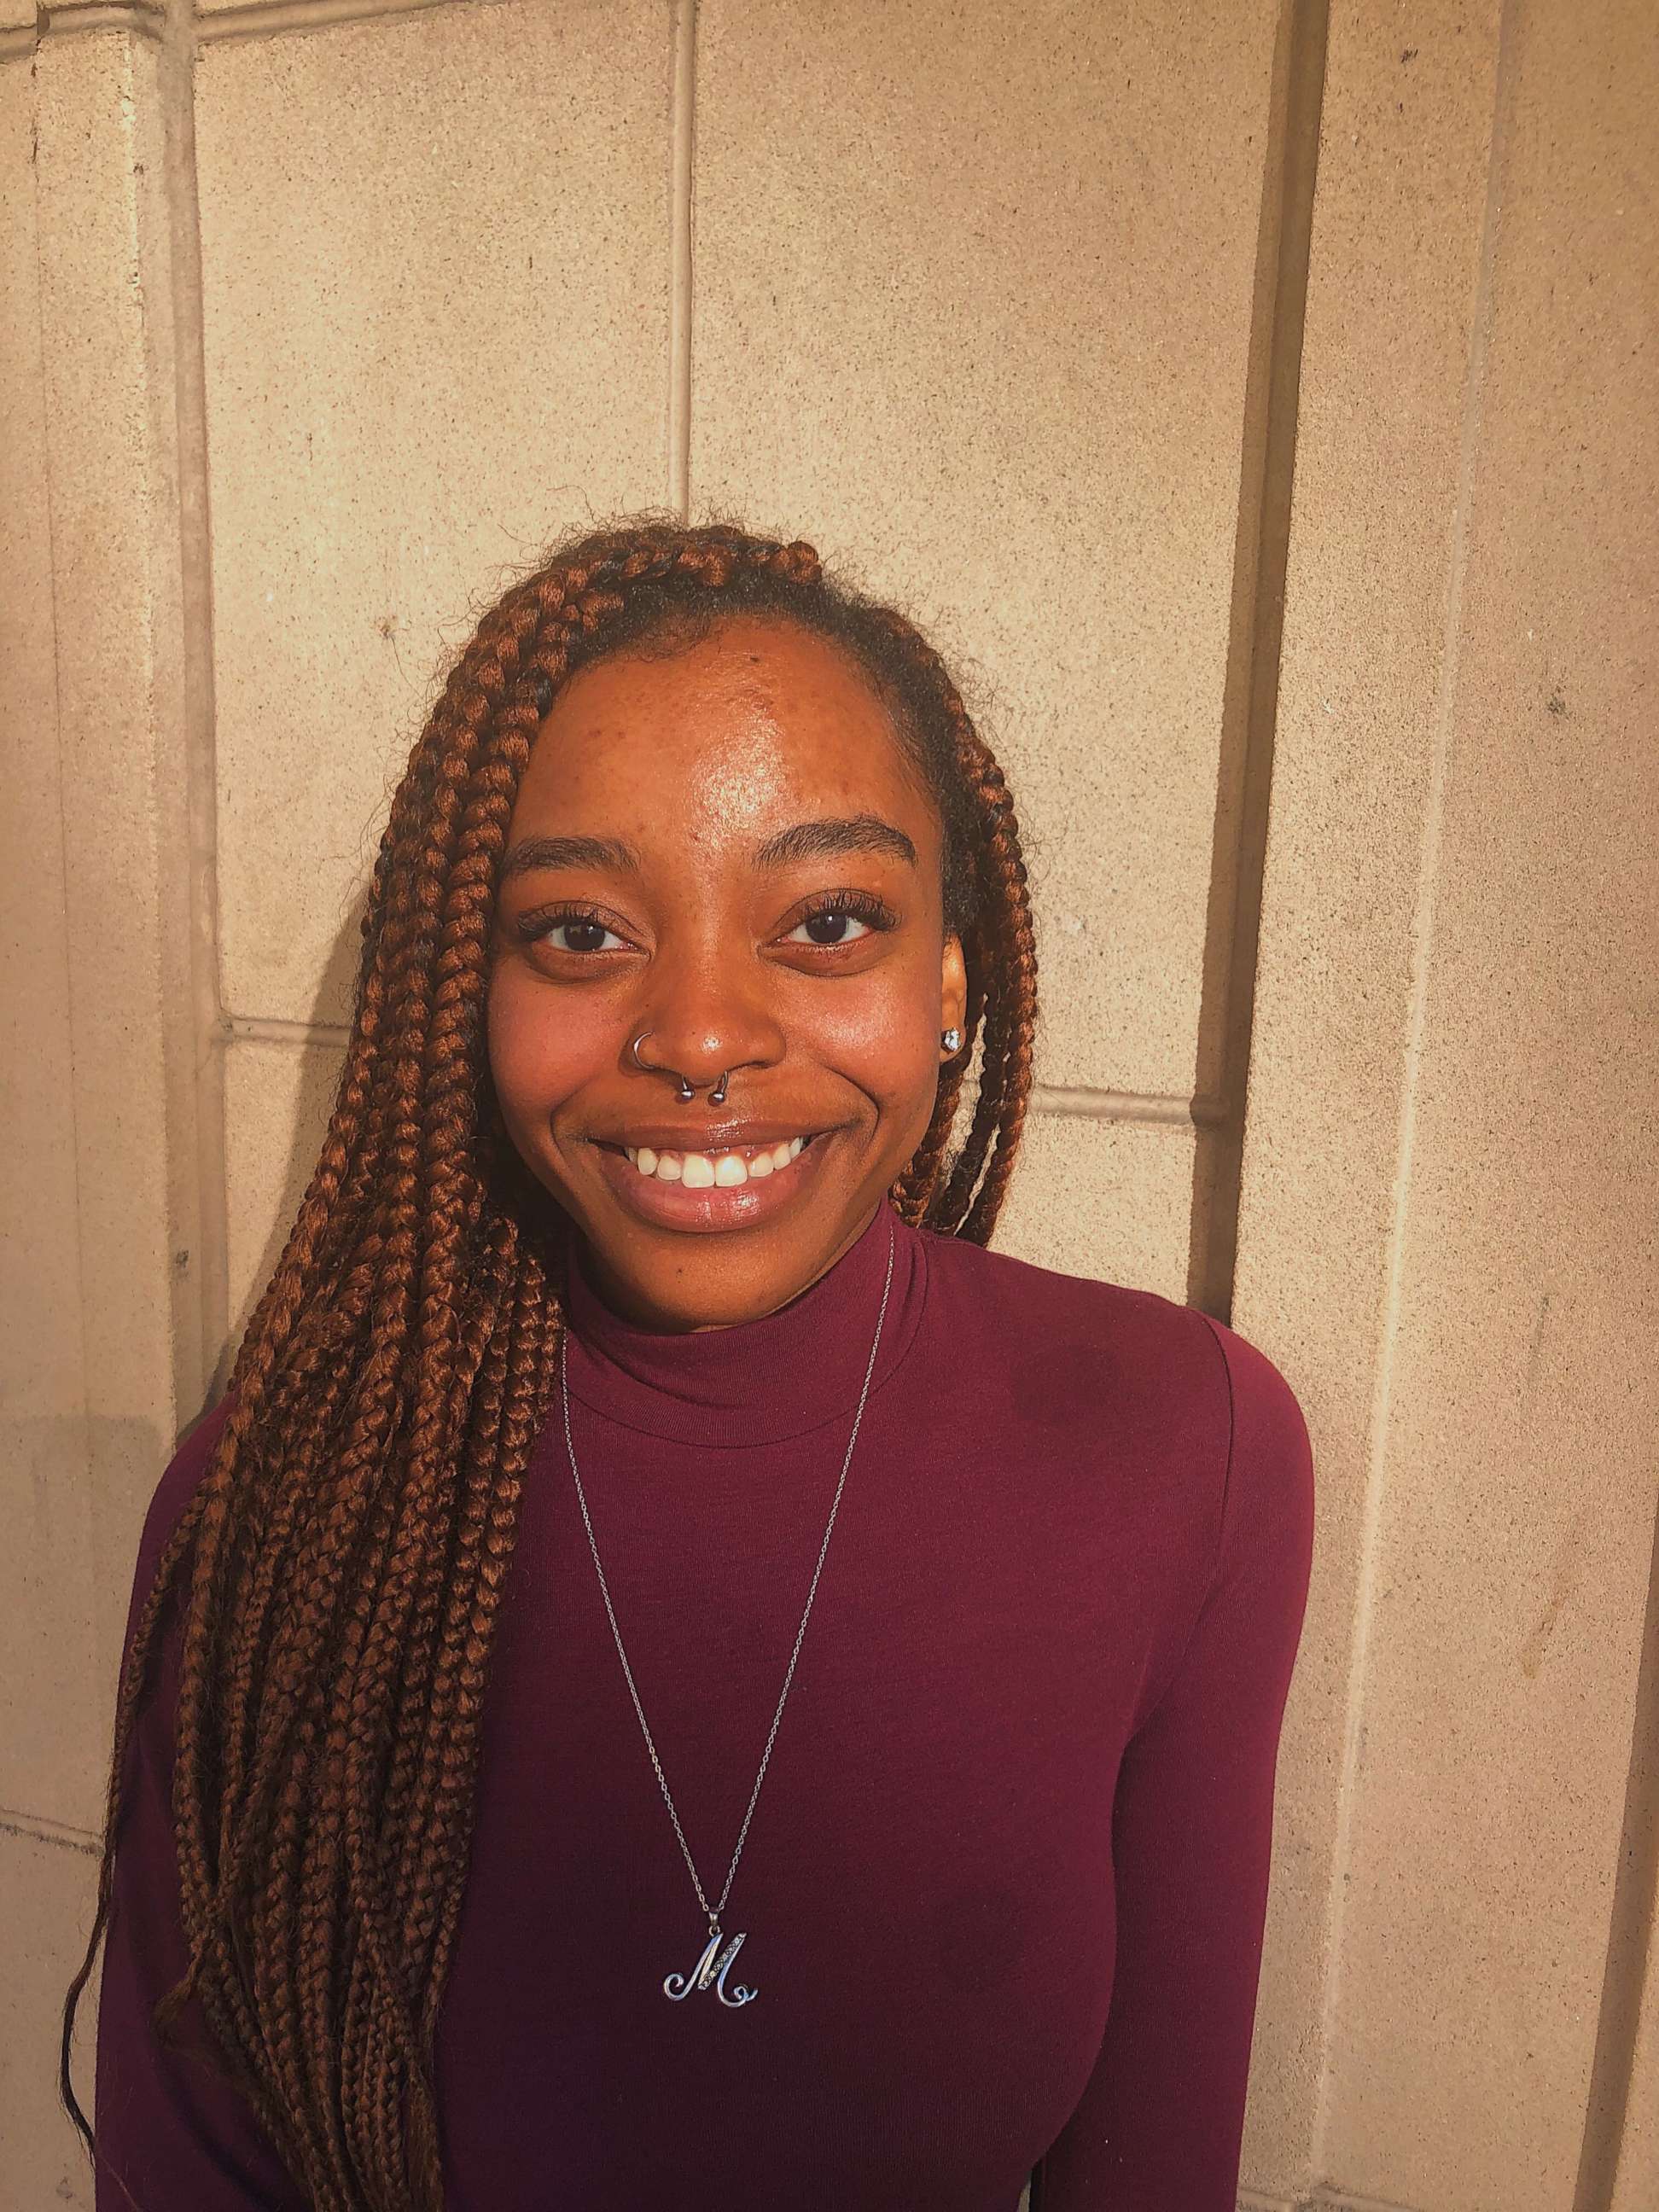 PHOTO: Morgan Newton, 19, a sophomore at Howard University in Washington D.C., recorded one positive second of her day for an entire semester and shared the video onto Twitter.